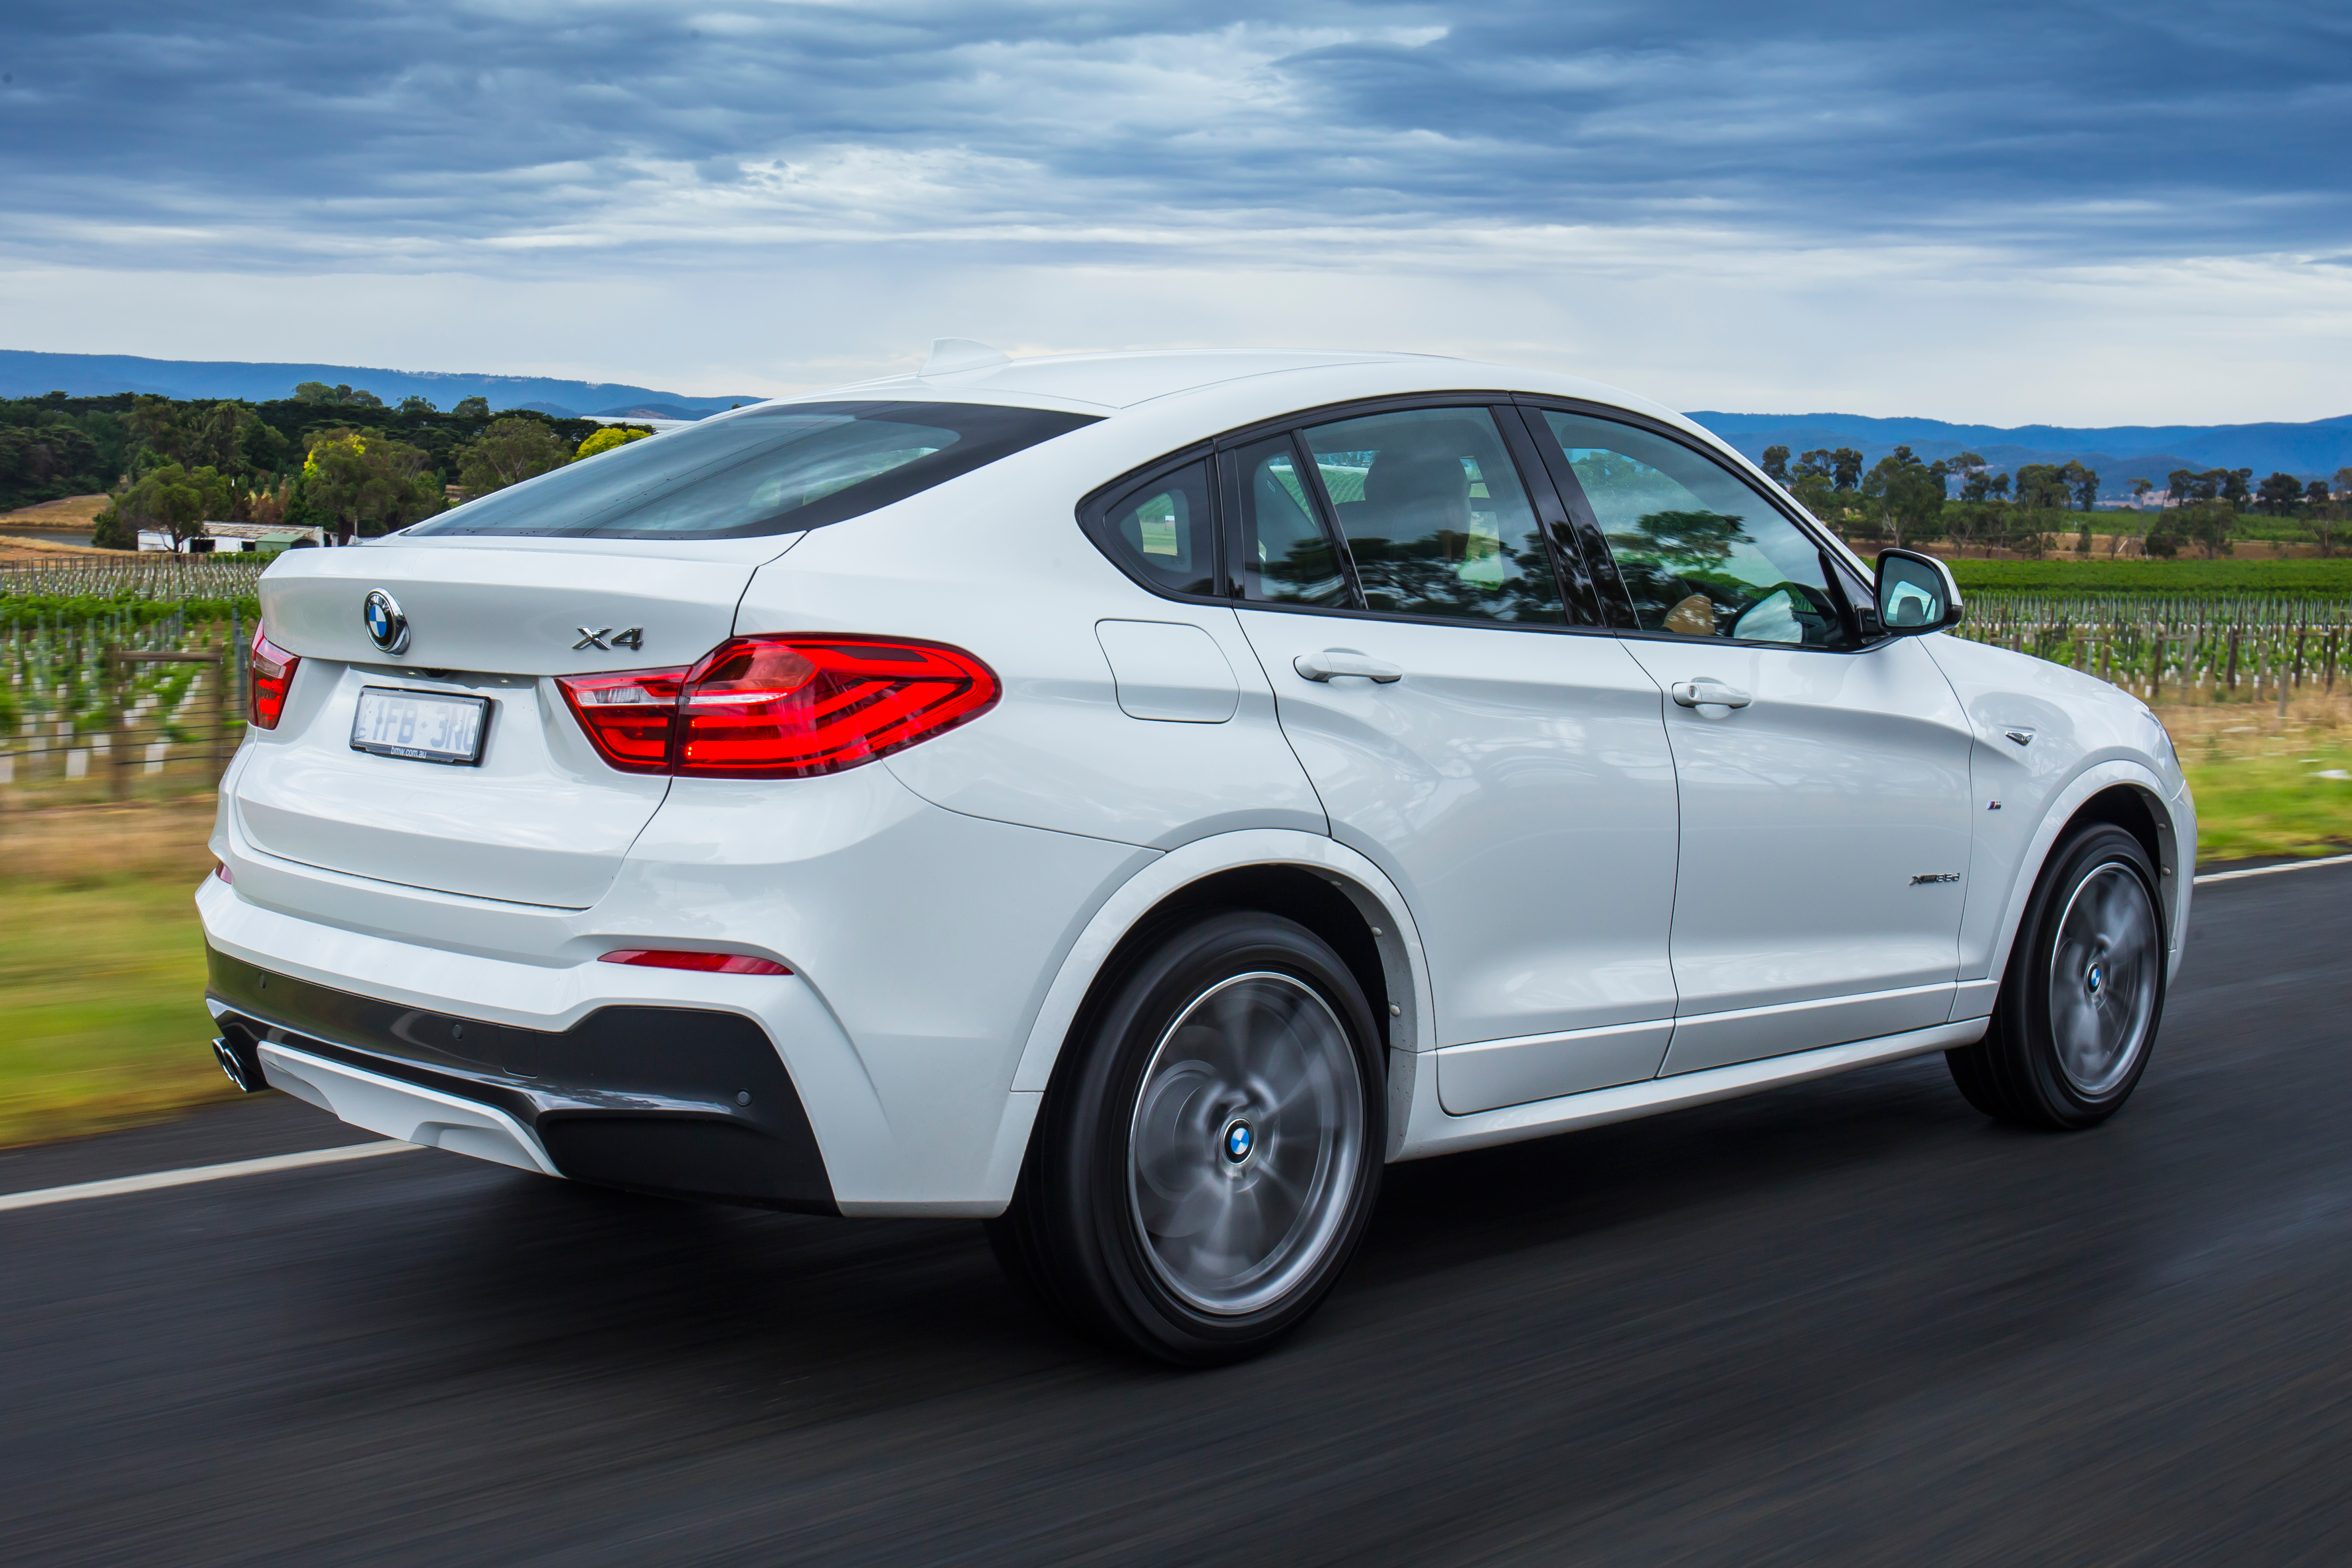 BMW X4 2014-2018 Used Car Review